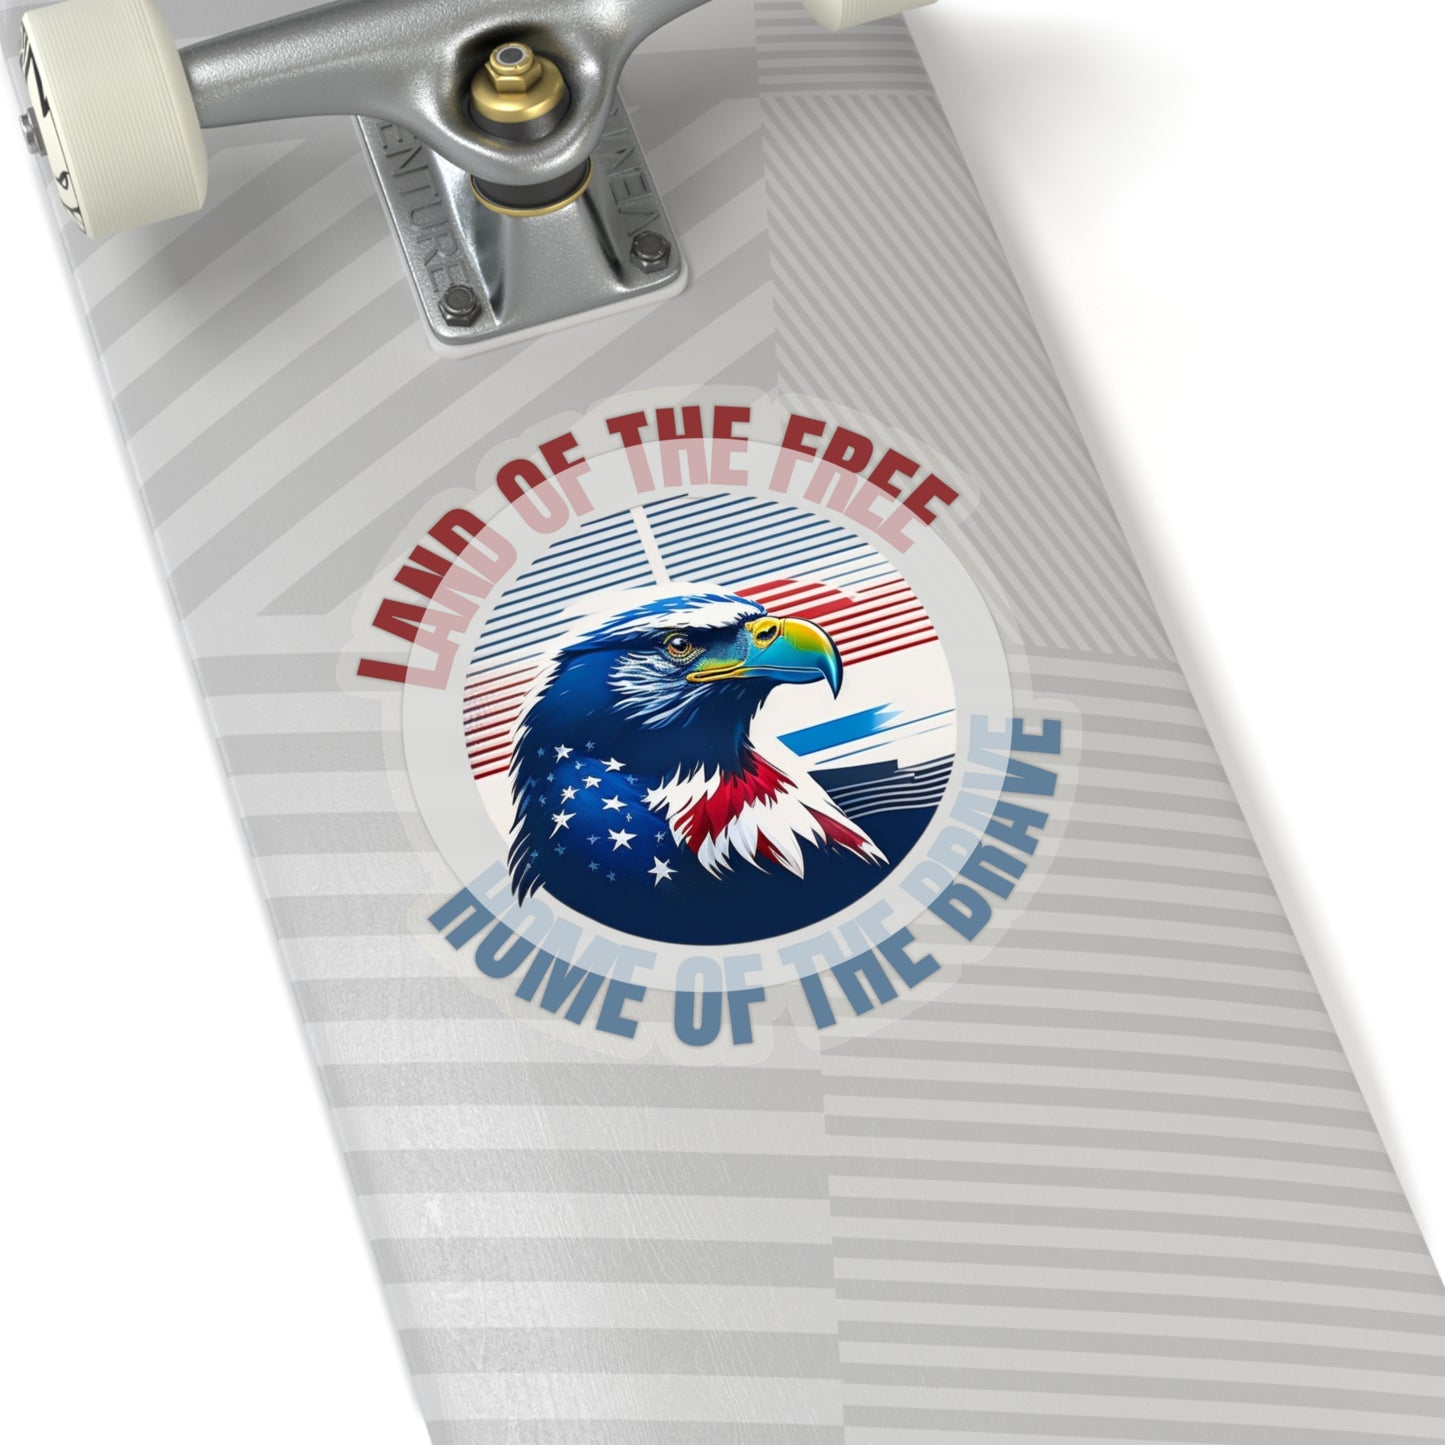 Land Of The Free - Home Of The Brave Kiss-Cut Sticker